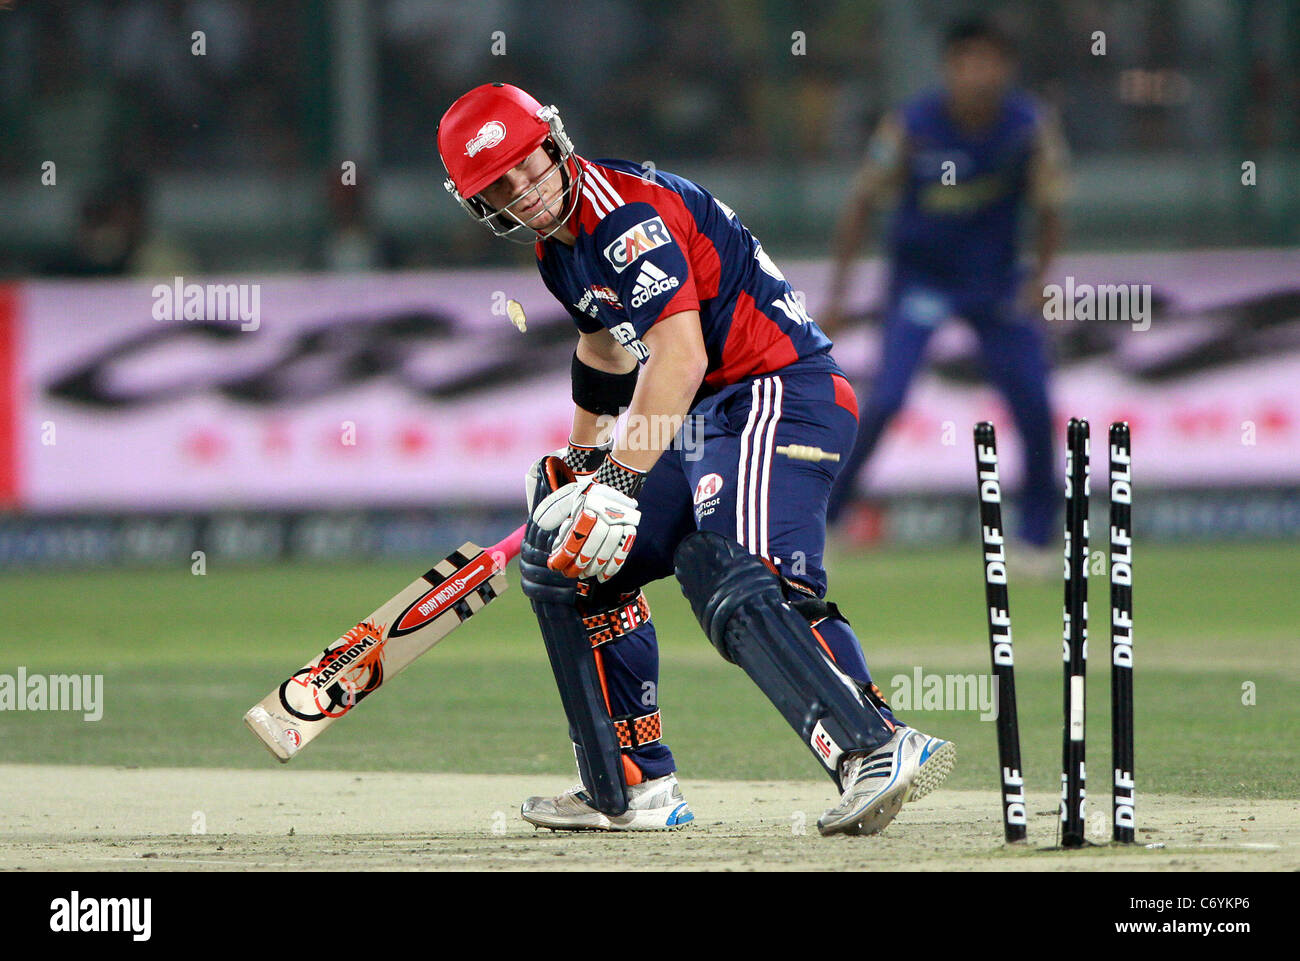 Delhi Daredevils player David Warner bowled out by Rajasthan Royals player Sumit Narwal during their match at the Indian Stock Photo